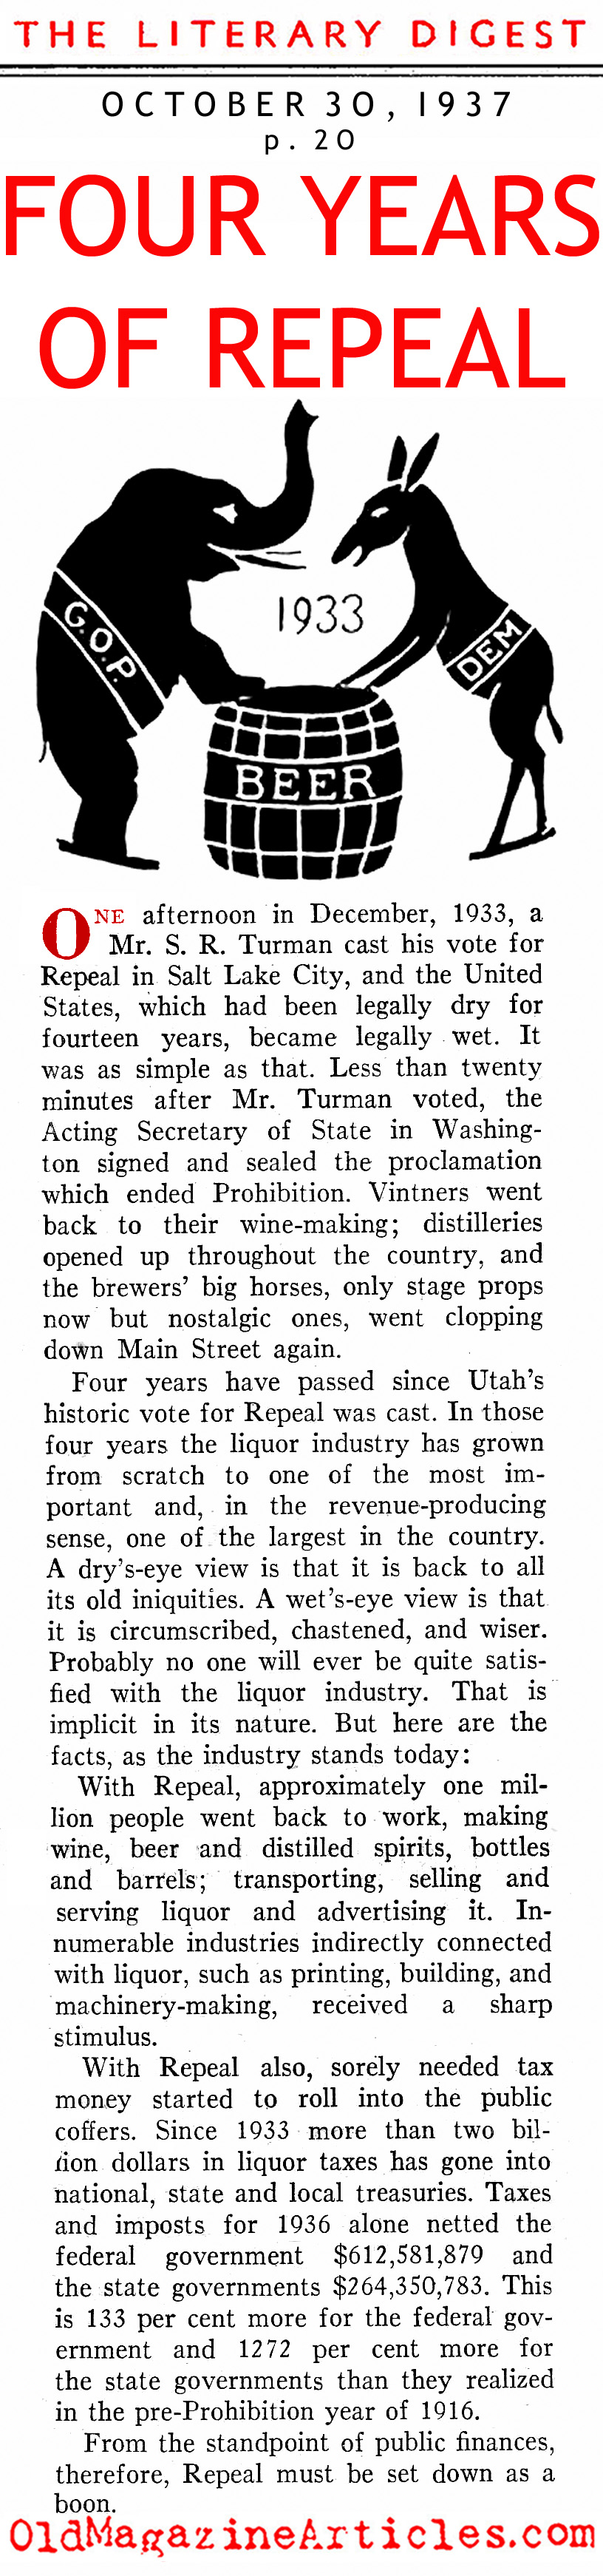 Repeal + Four Years (Literary Digest, 1937)